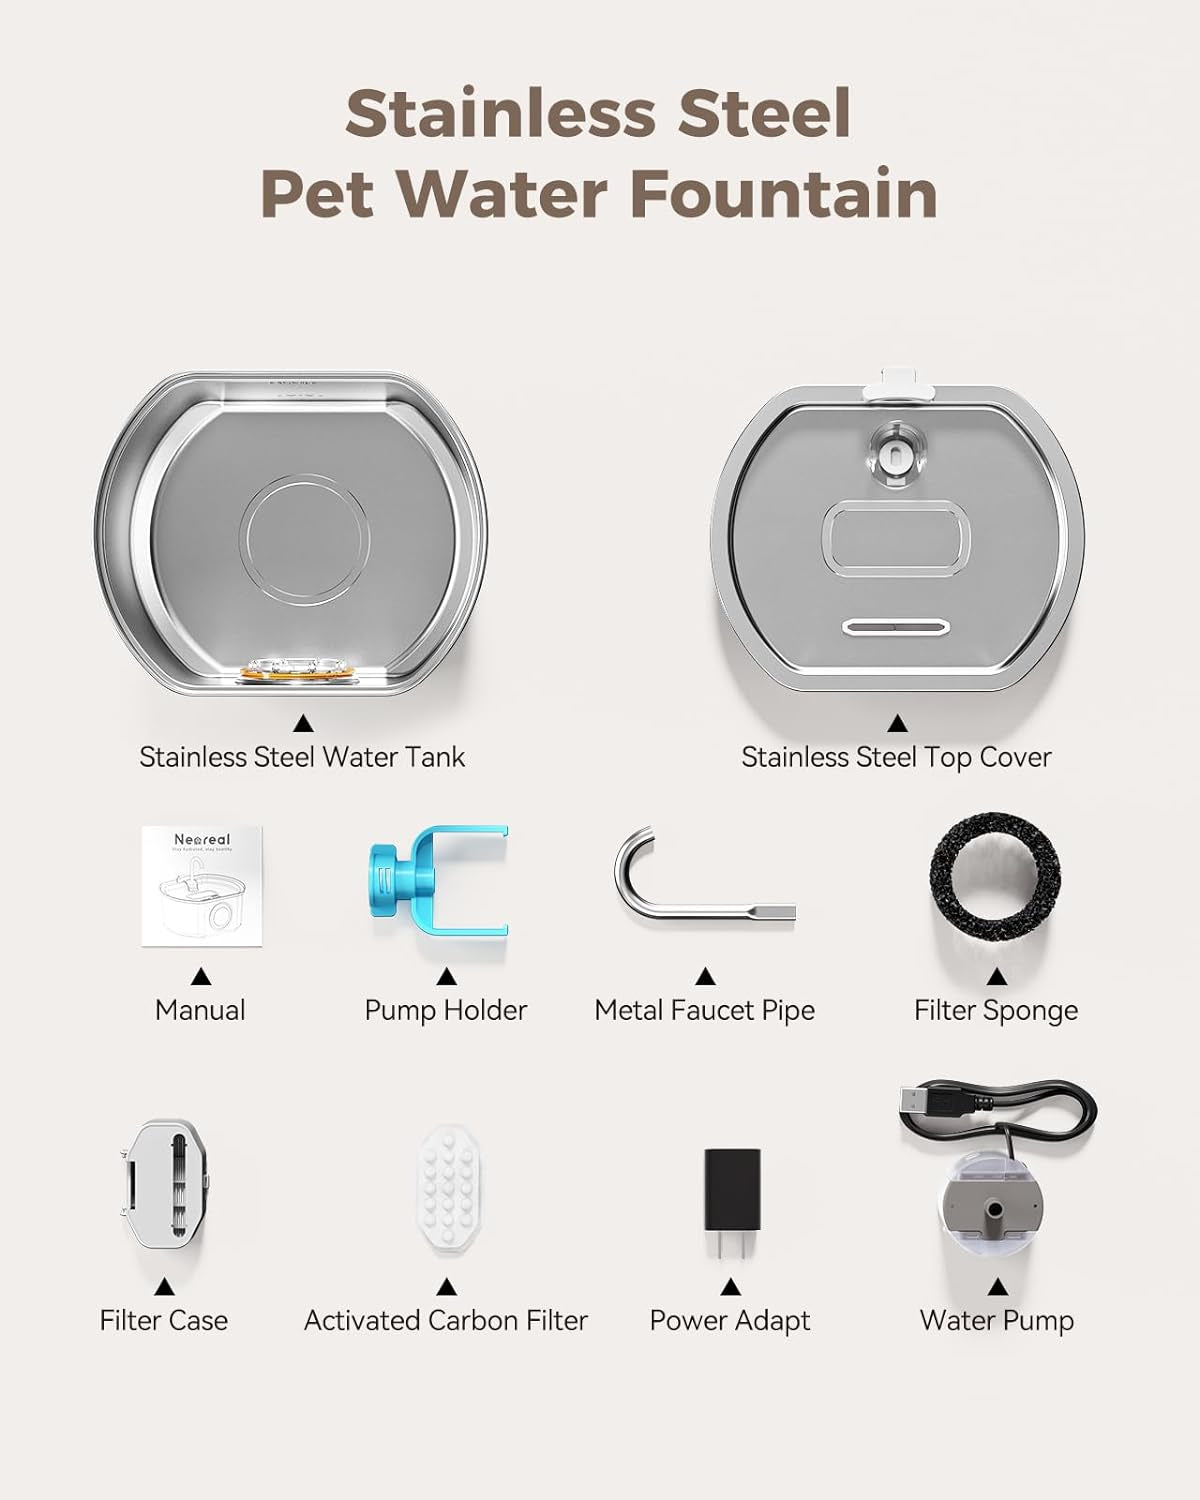 Cat Water Fountain Stainless Steel: 108Oz/3.2L Cat Fountain for Drinking- Pet Water Fountain for Cats inside - Automatic Cat Water Dispenser Bowl - Cat Feeding & Watering Supplies - Water Level Window